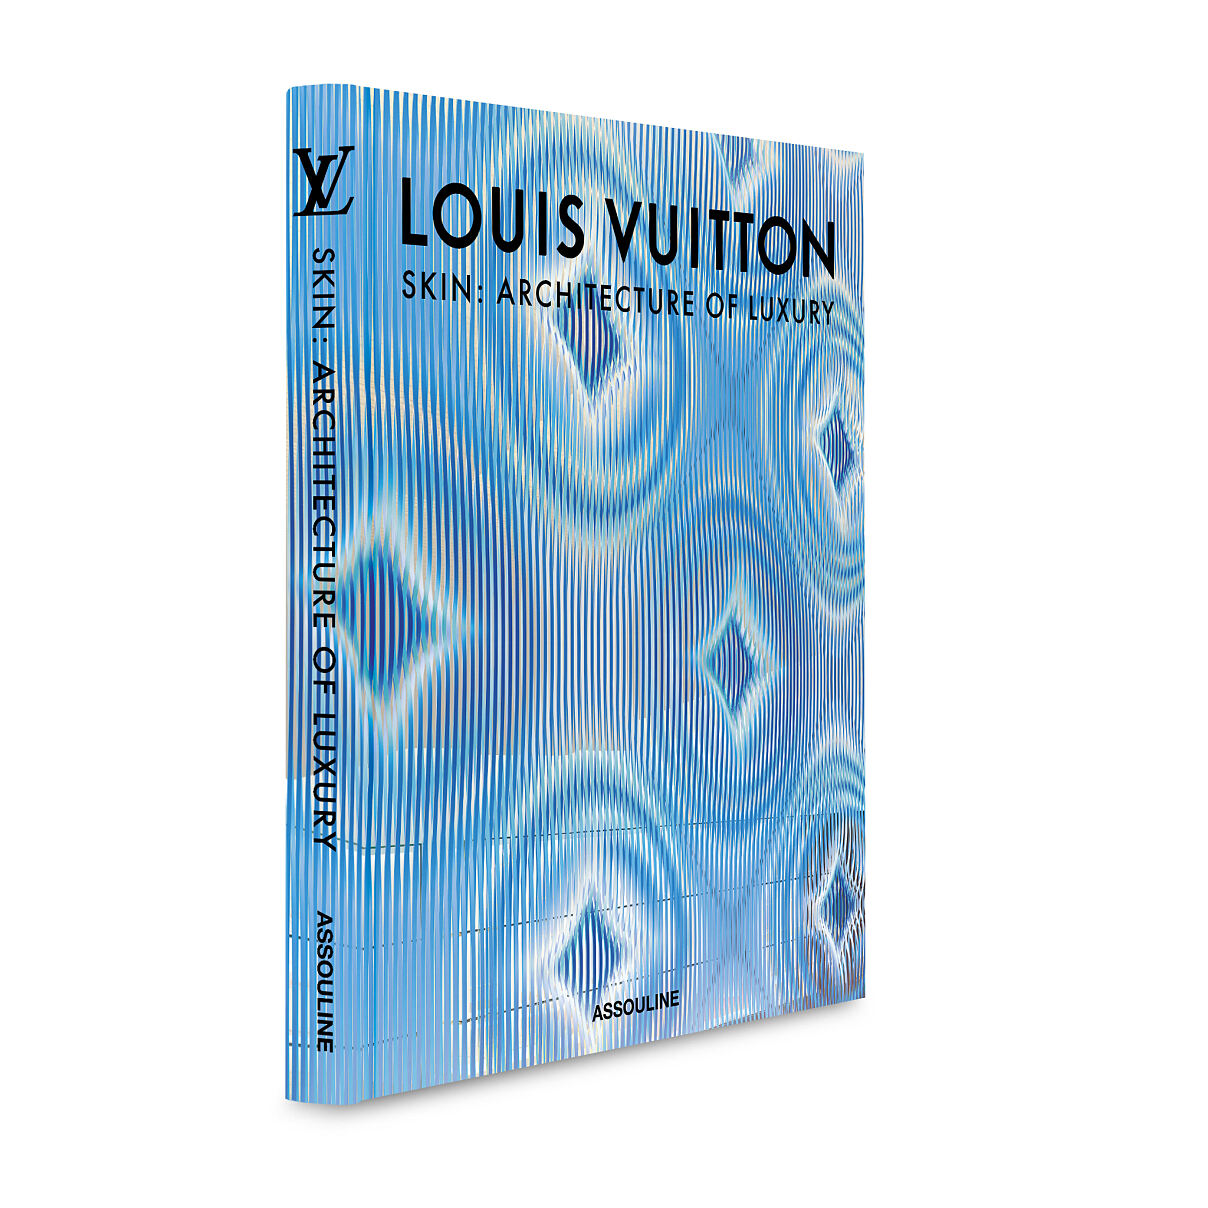 LV_Louis Vuitton Skin - The Architecture of Luxury_Cover (4)